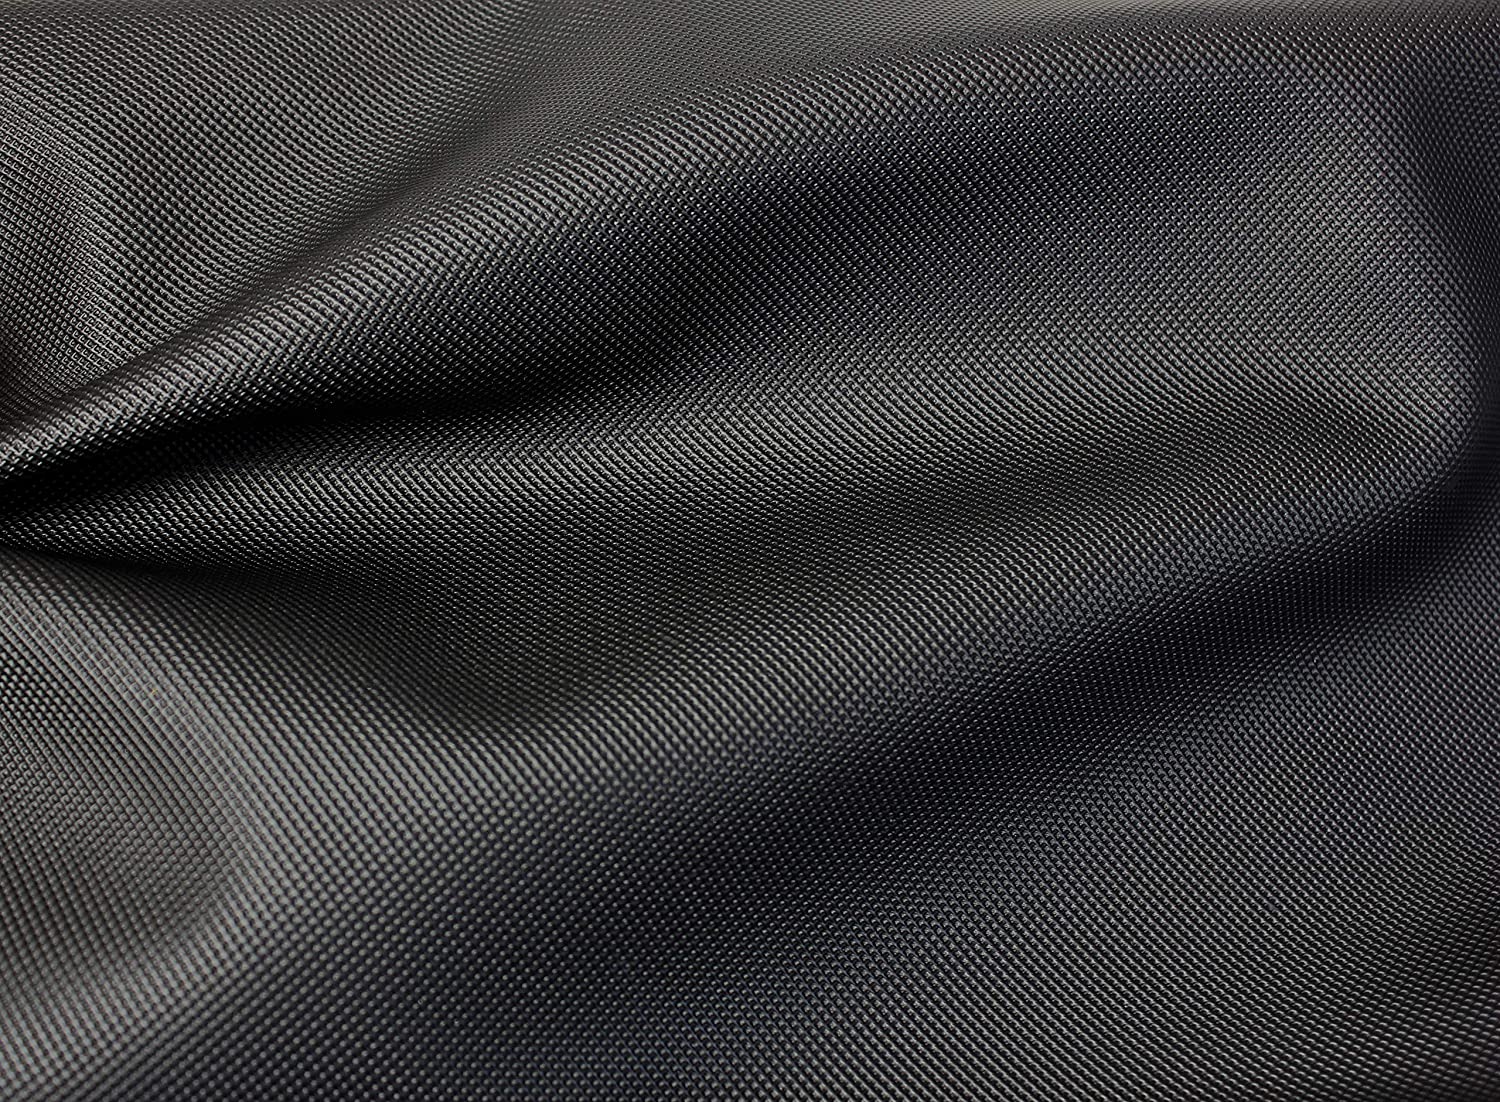 NVERIAG Embossing Faux Leather Fabric, Faux PVC Leather Fabric